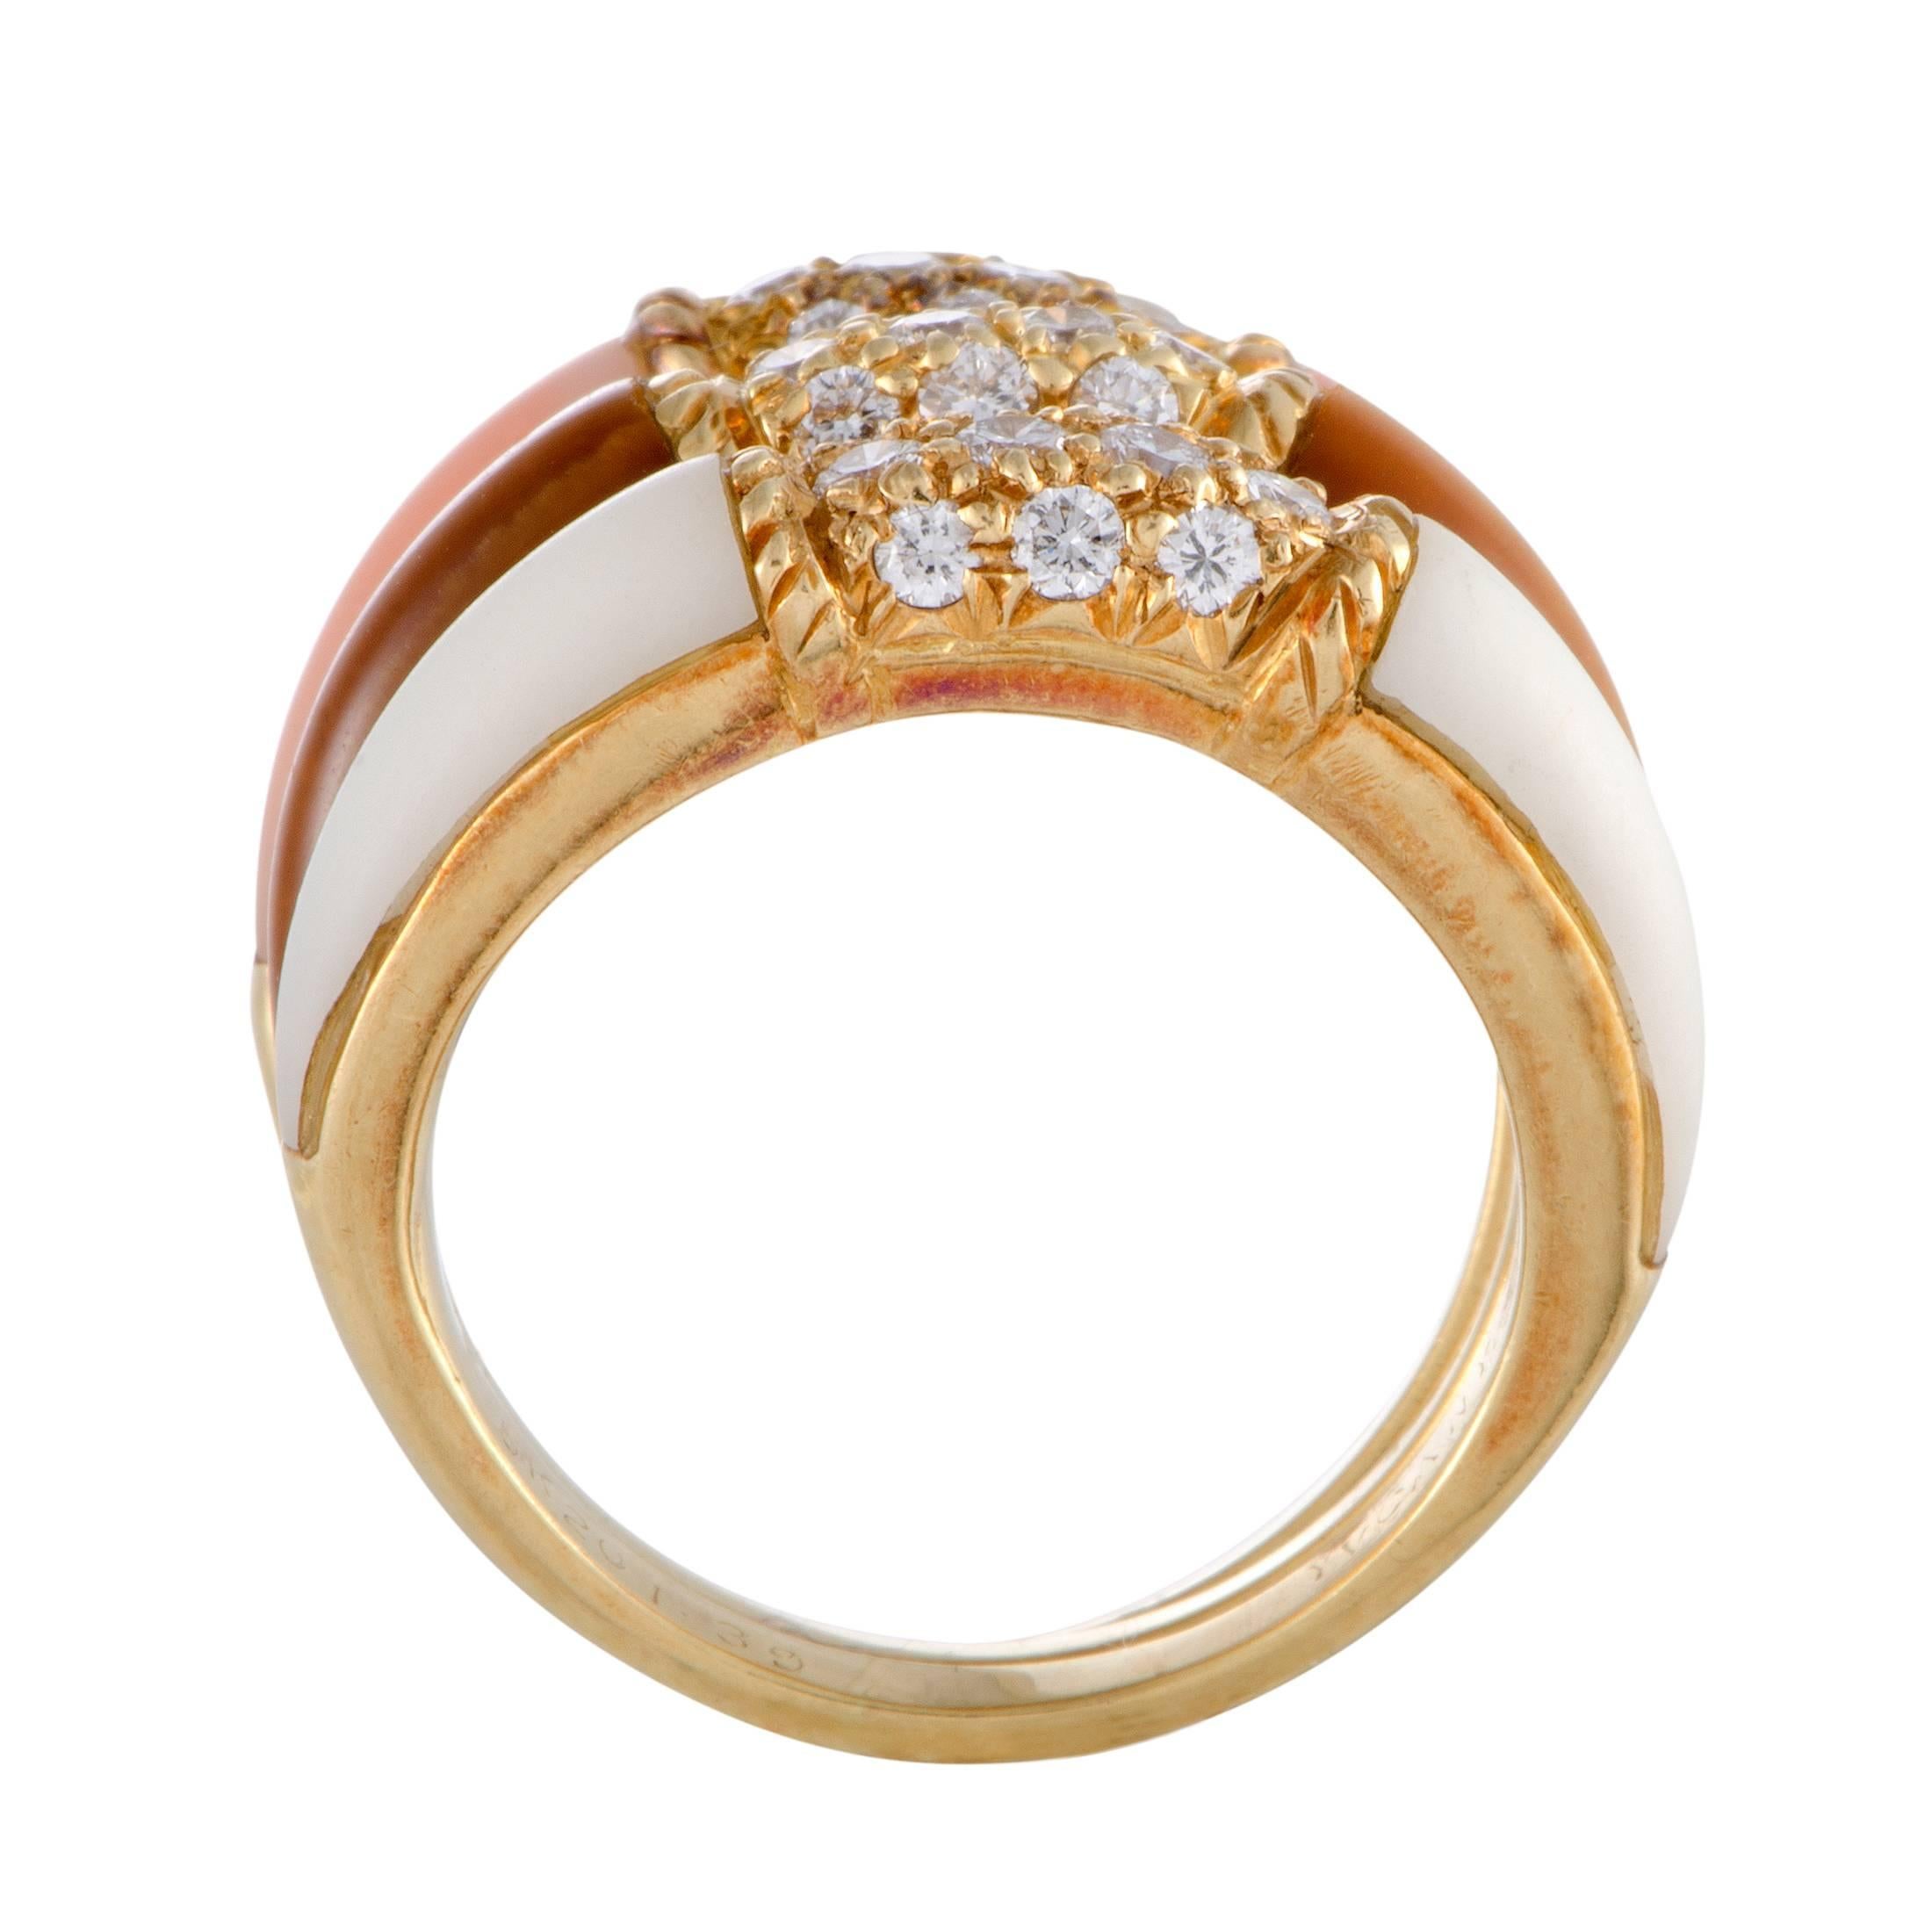 Renowned for their intriguing designs, fabulously feminine style, and exquisite execution, Van Cleef & Arpels created this remarkably subtle and graceful ring set crafted in spotless 18K yellow gold and embellished with resplendent diamonds as well